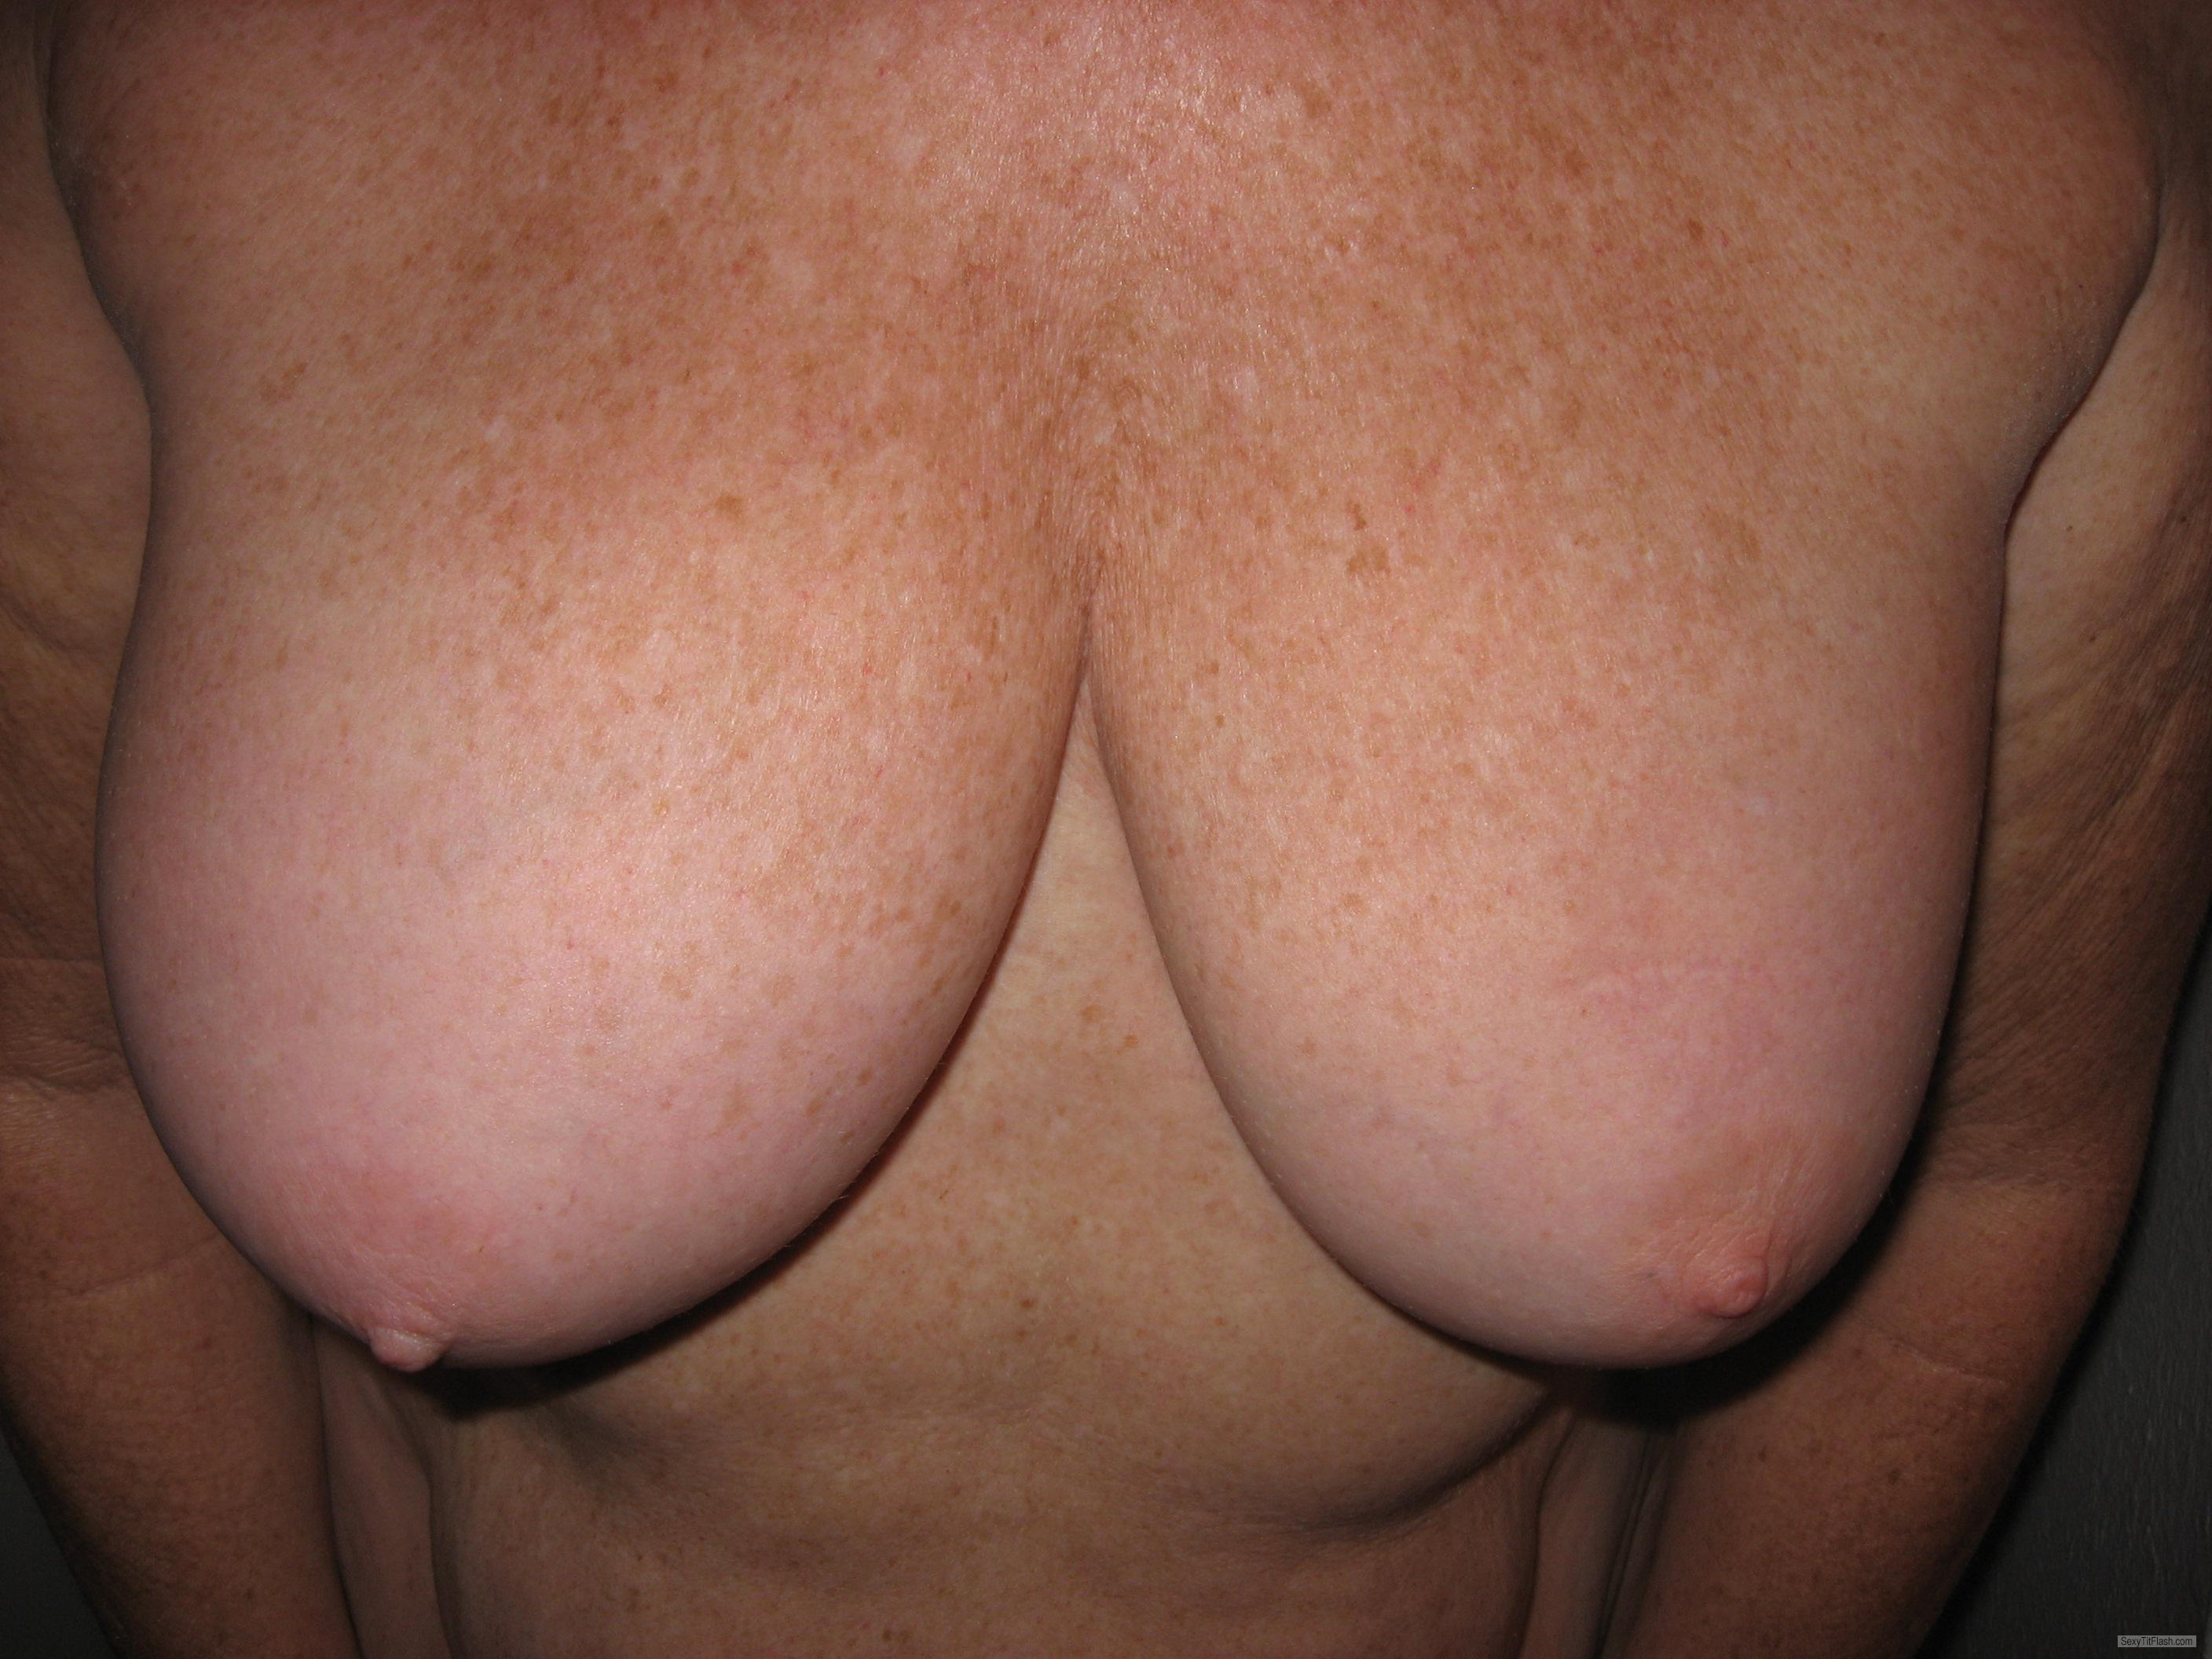 Tit Flash: Wife's Medium Tits - Lucy58 from United States